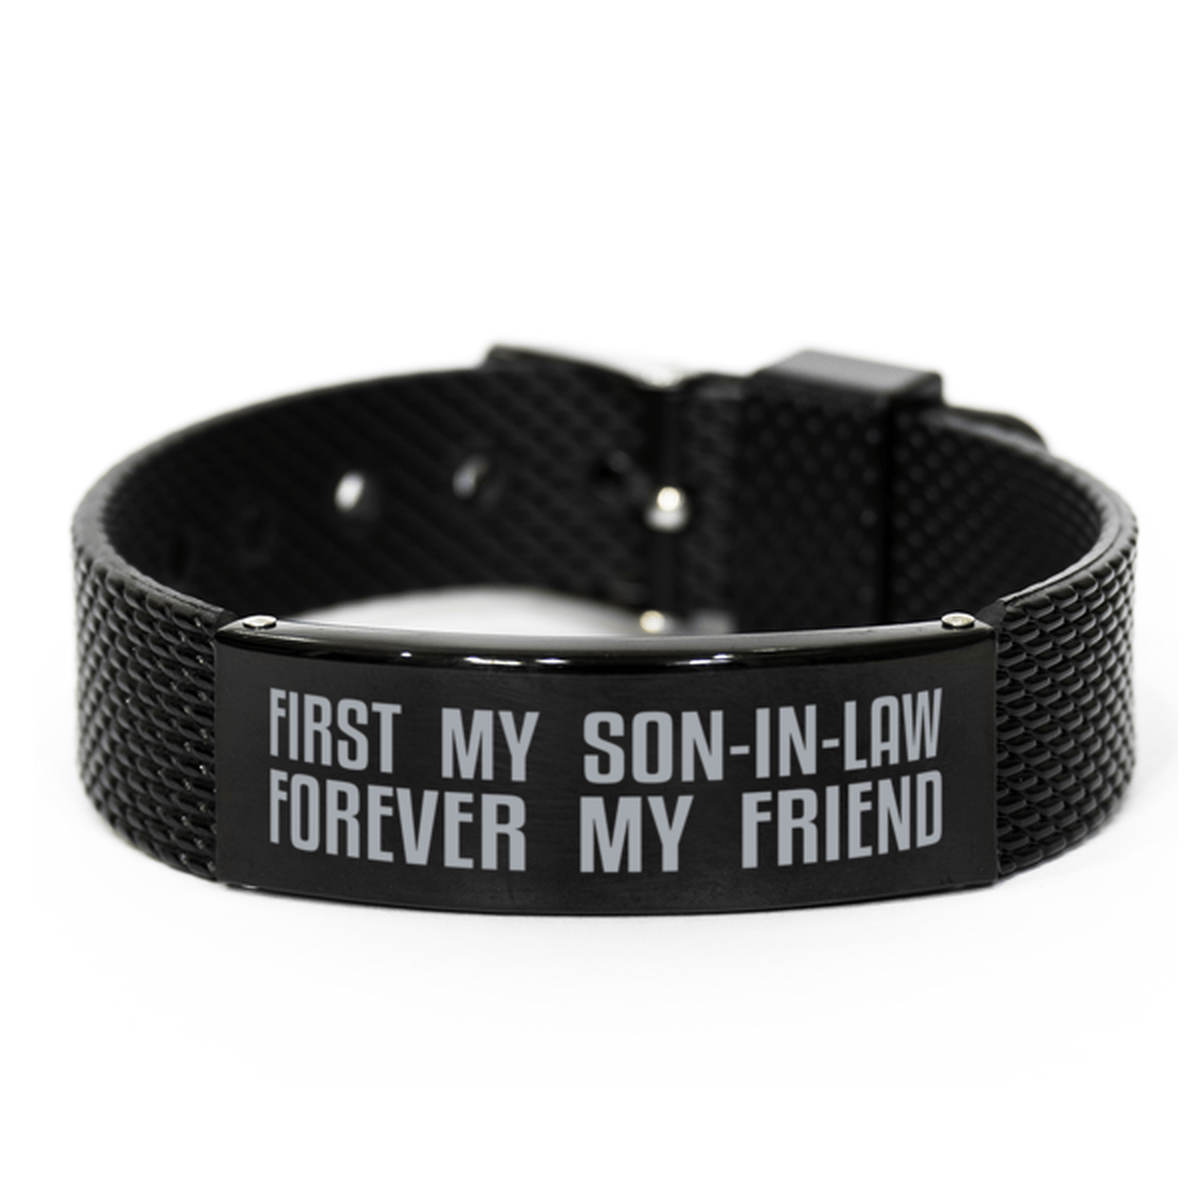 Unique Son-in-law Black Shark Mesh Bracelet, First My Son-in-law Forever My Friend, Best Gift for Son-in-law Birthday, Christmas